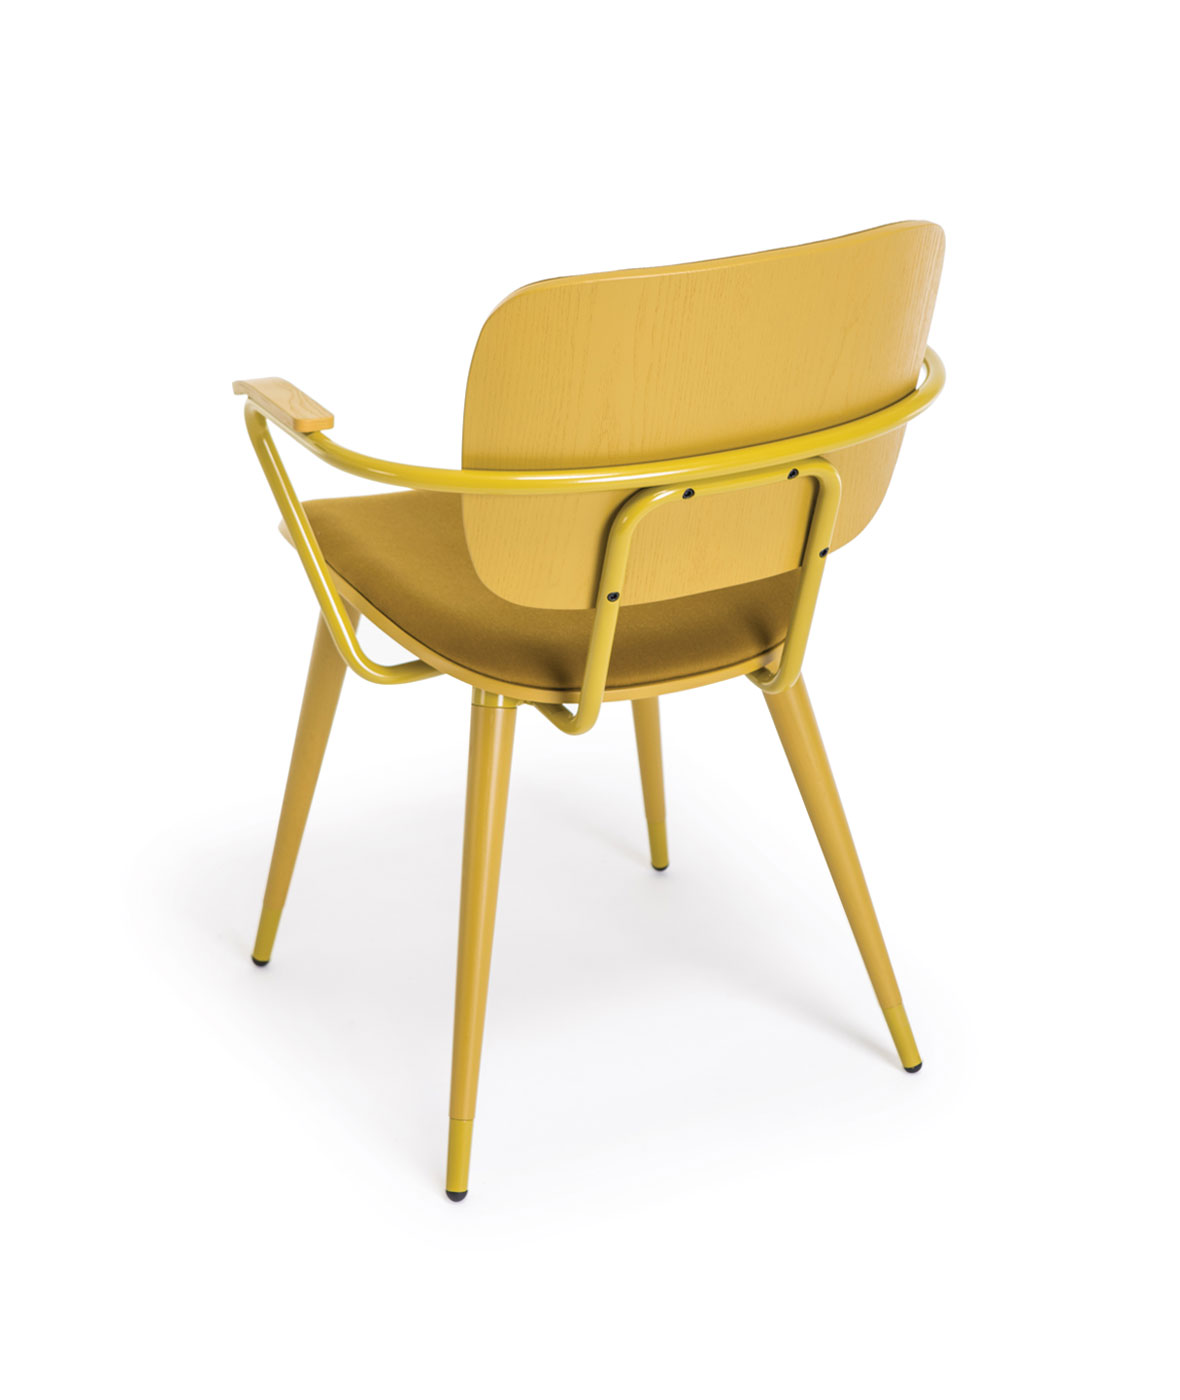 ABC chair with wooden armrests and legs - Vergés